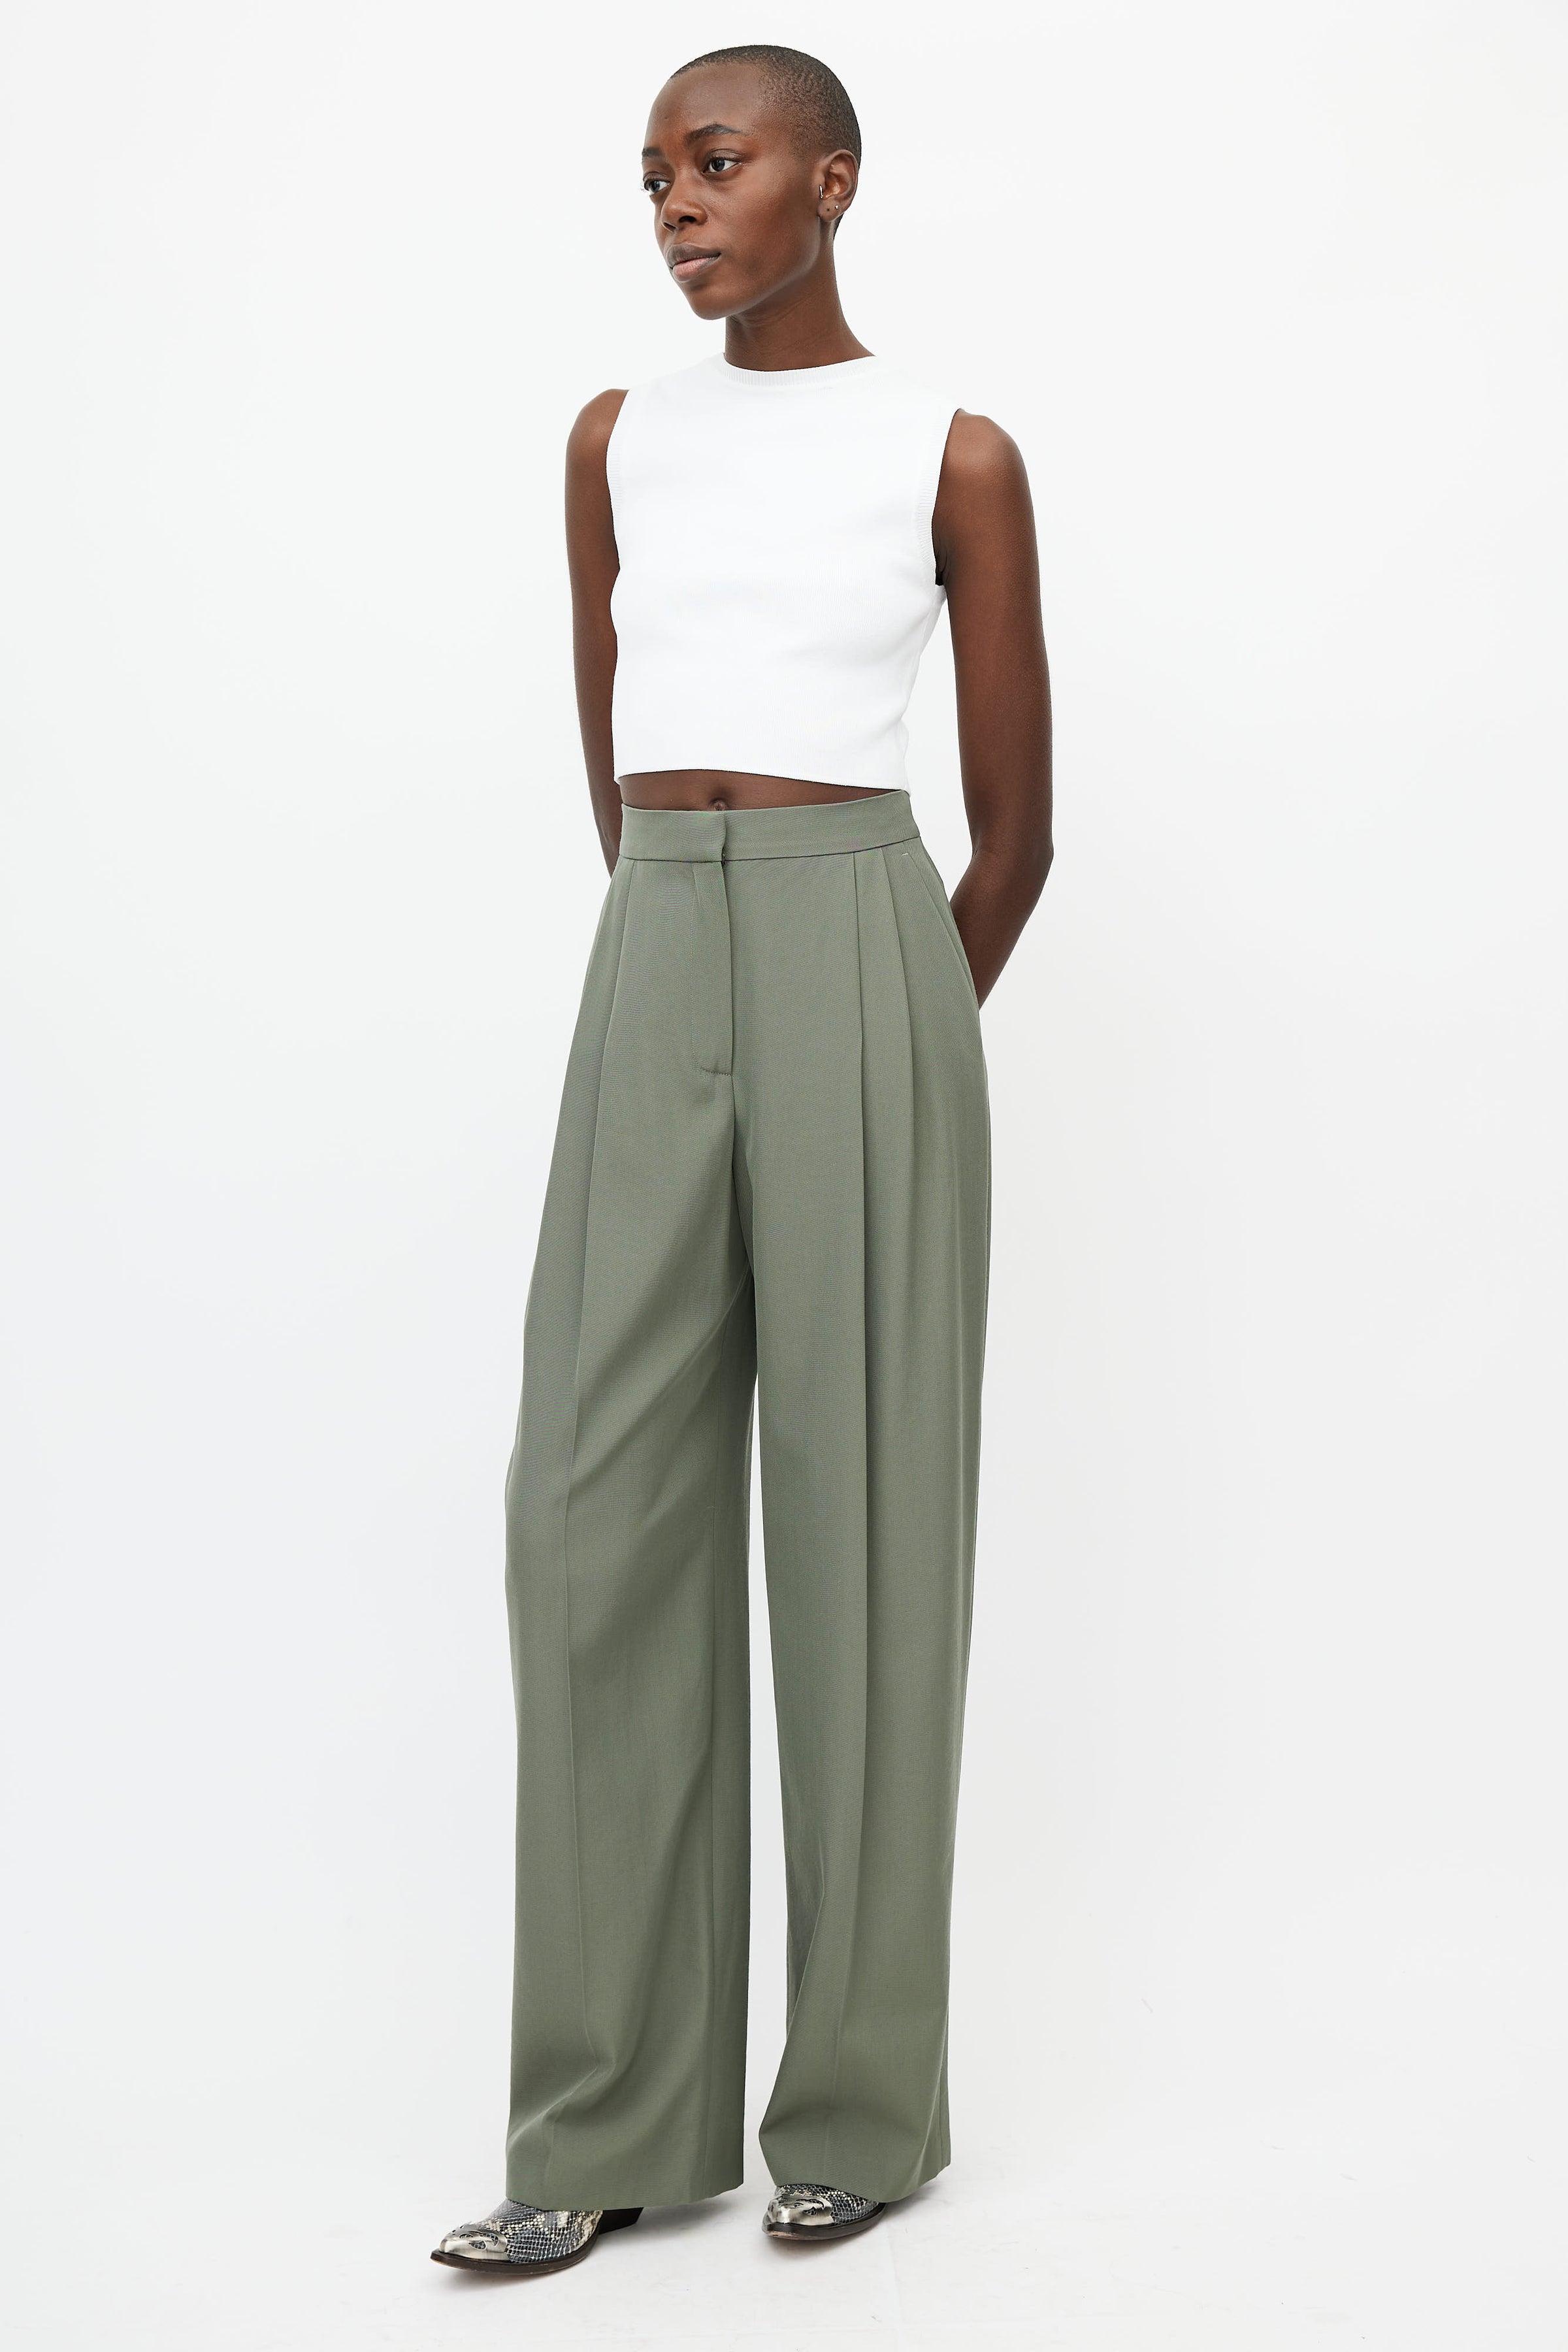 Zara Green Pleated Wide Leg Pants Size Small NWT New With Tags